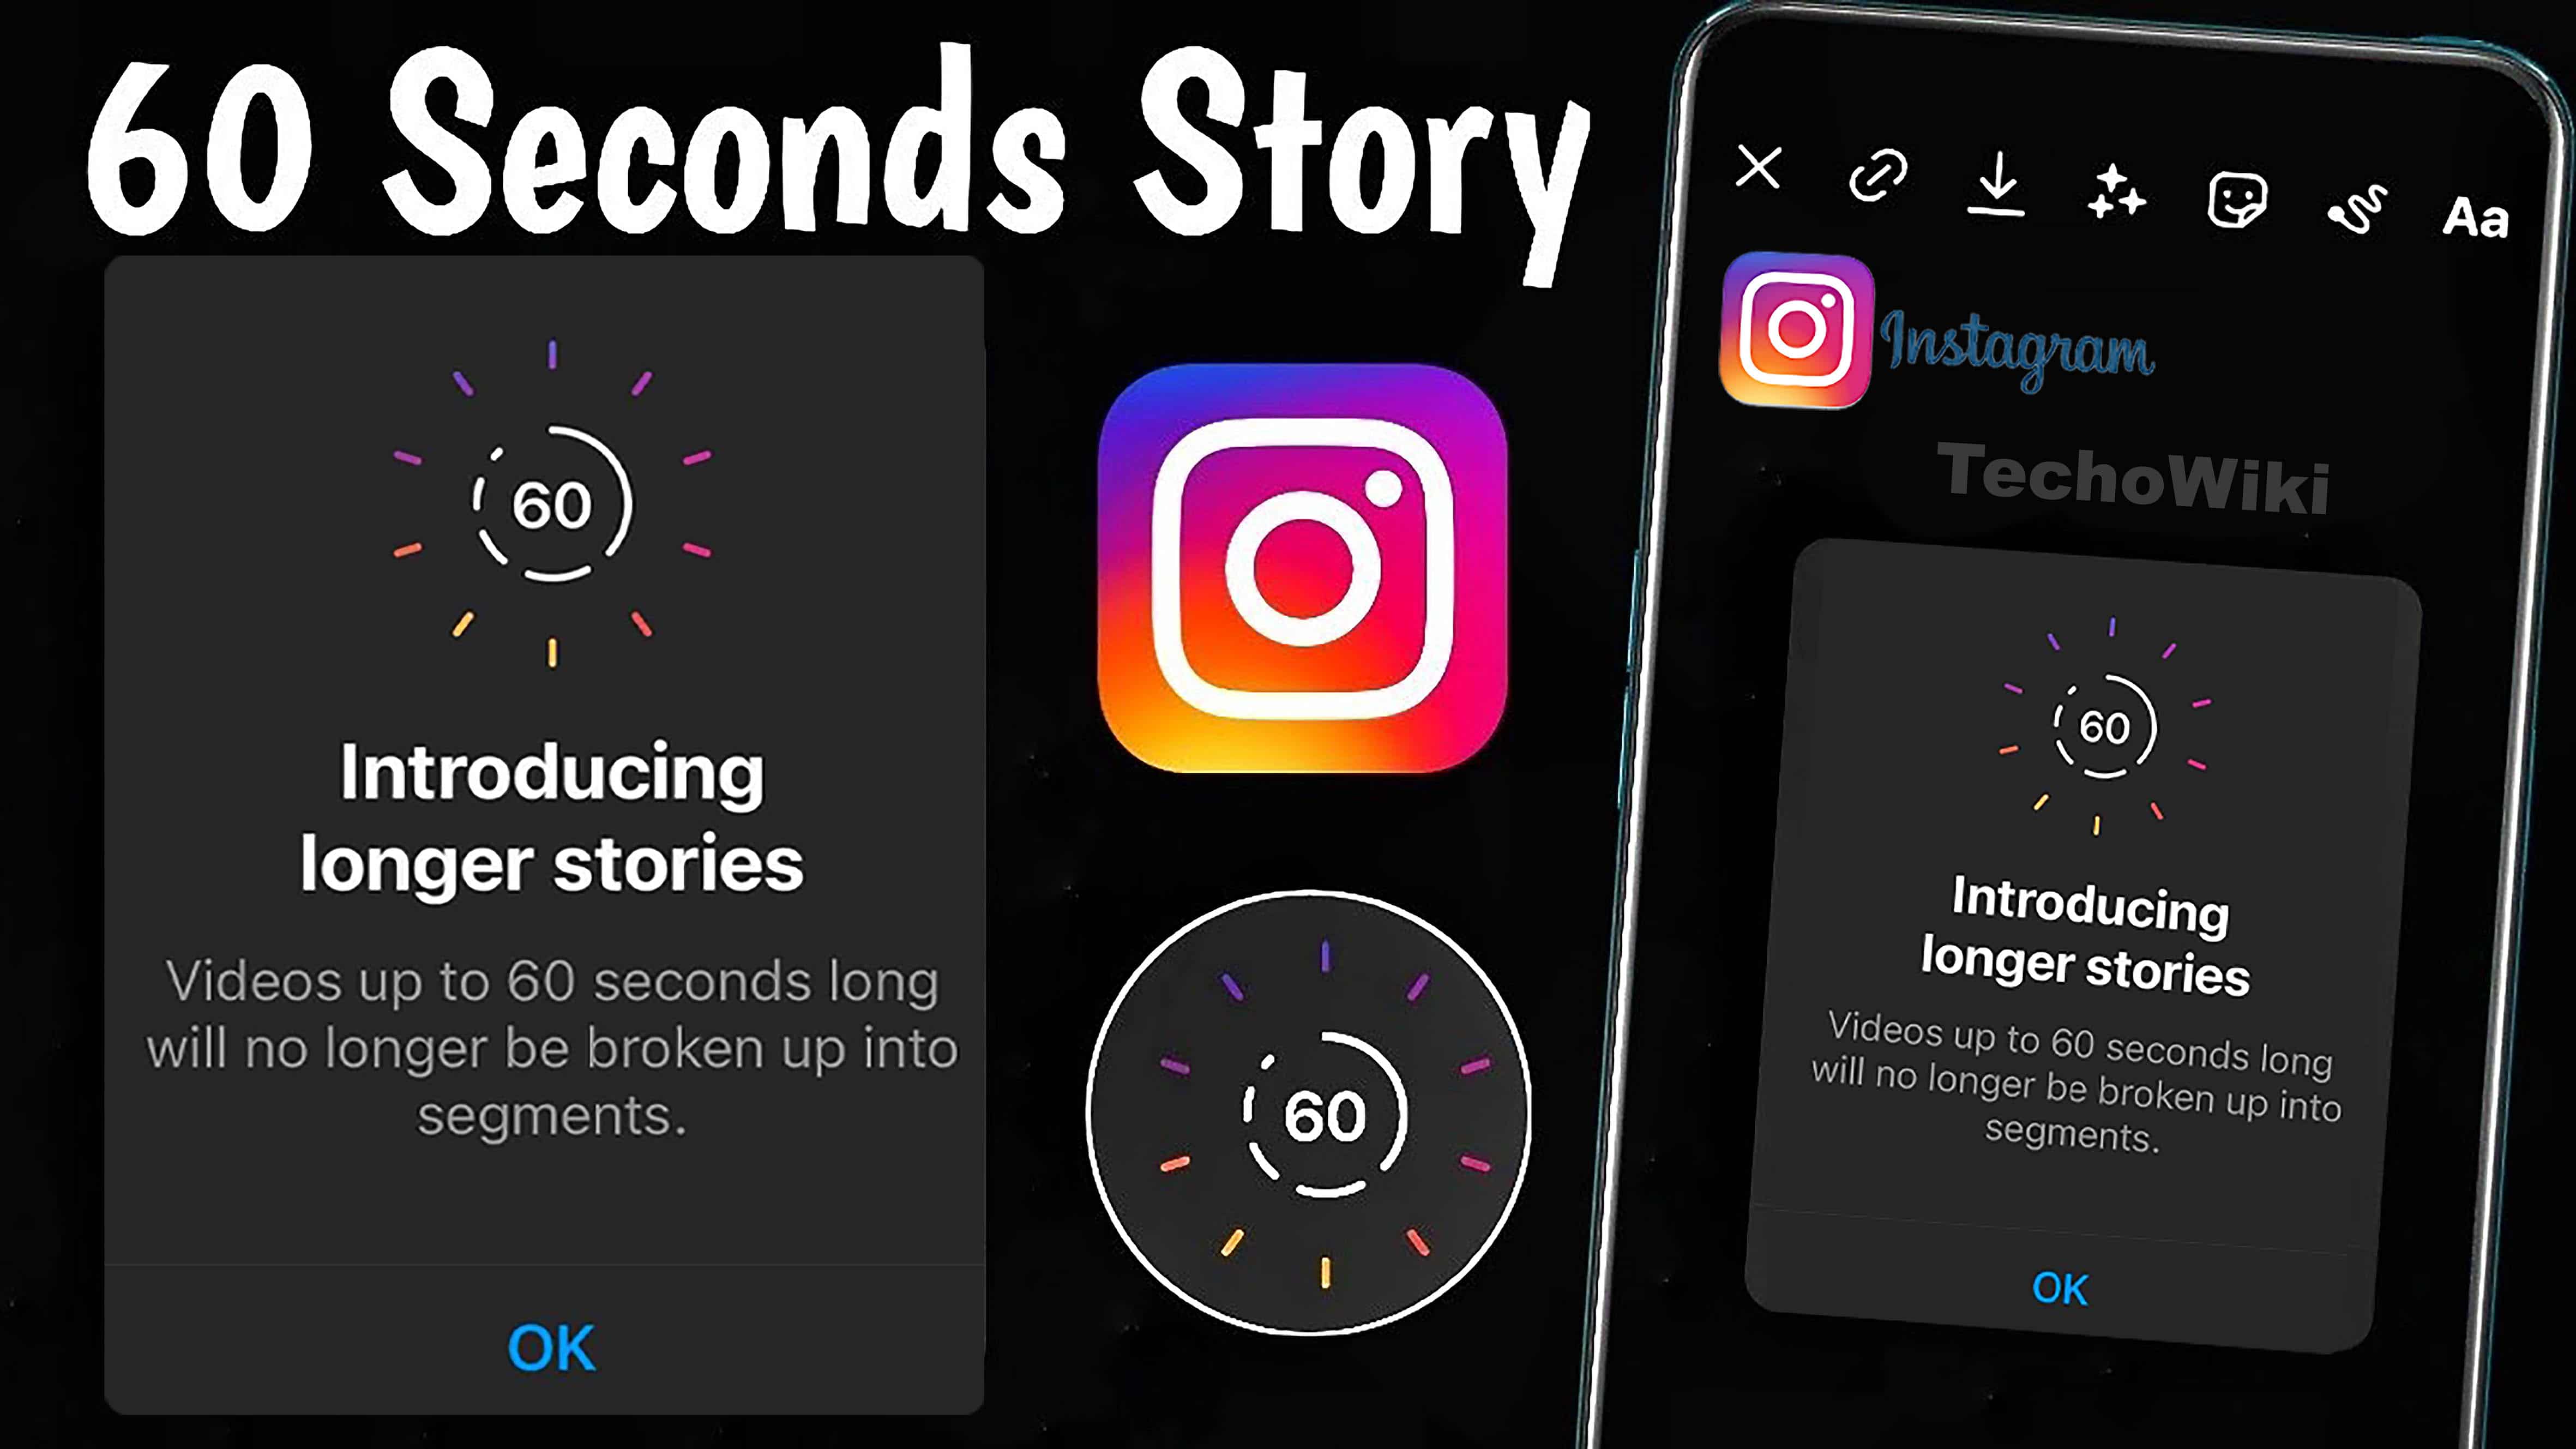 How to post 60 second stories on Instagram